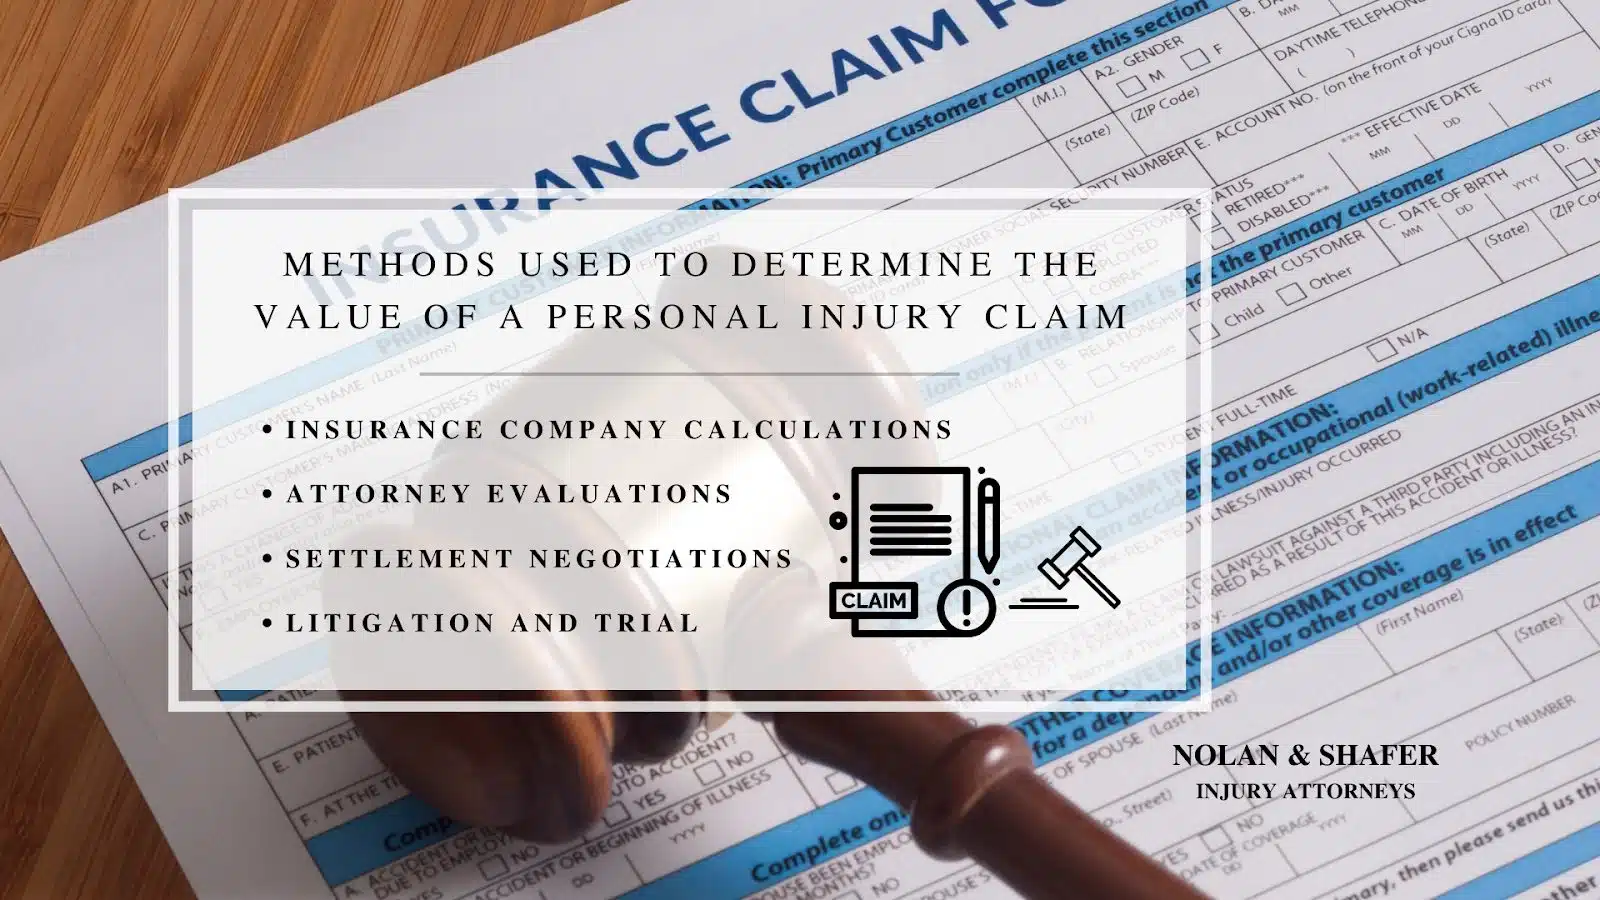 Infographic image of methods used to determine the value of a personal injury claim